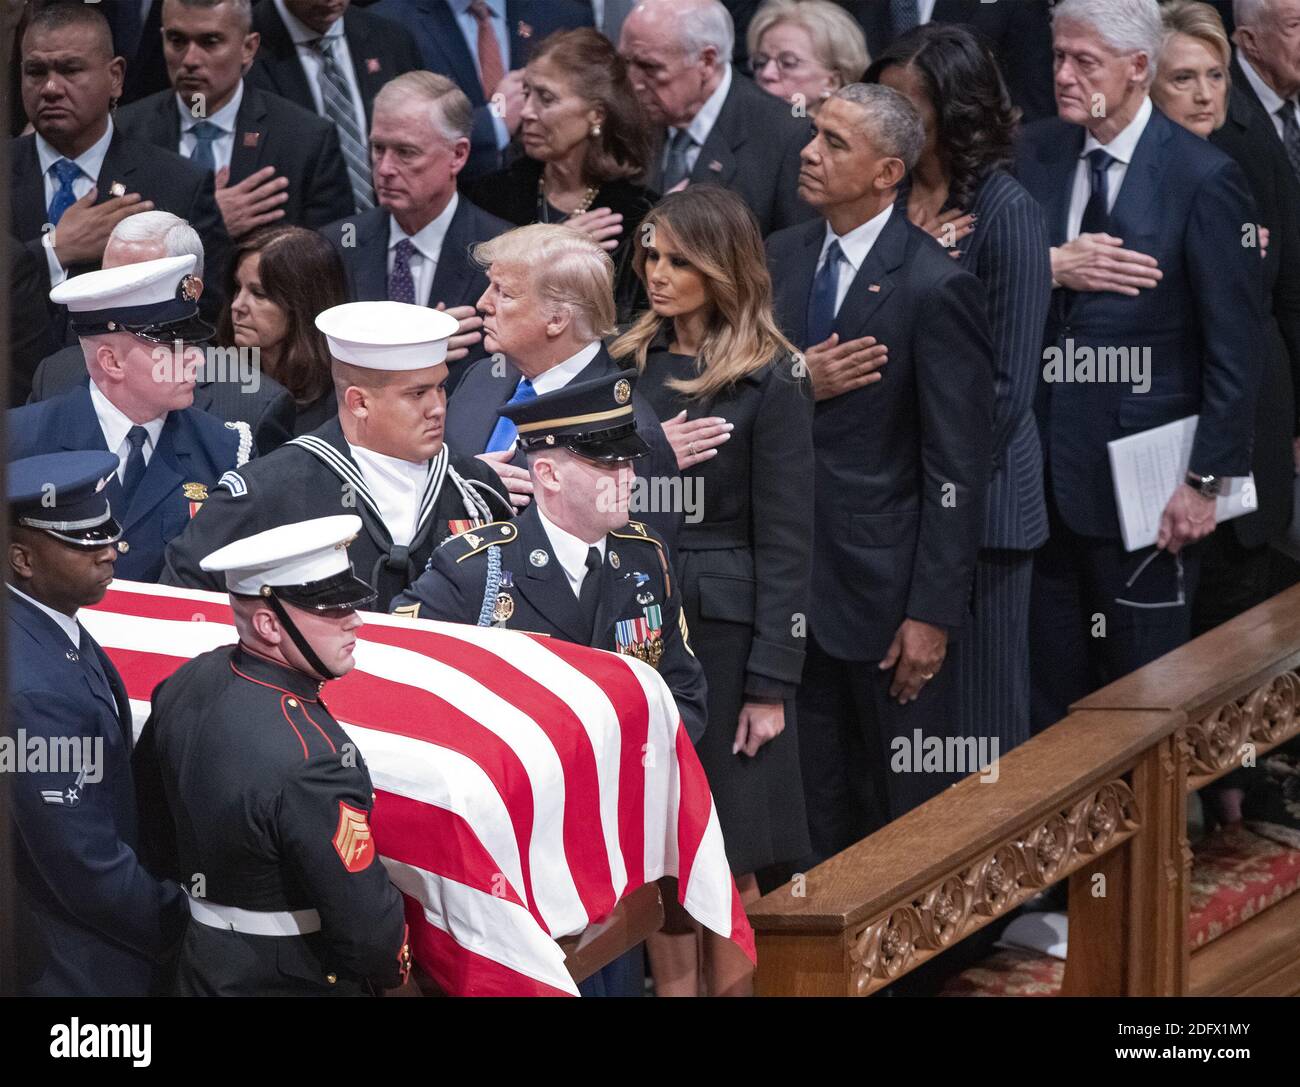 National funeral service in honor of the late former United States President George H.W. Bush at the Washington National Cathedral in Washington, DC on Wednesday, December 5, 2018. Visible in the frame are former US Vice President Dan Quayle, Marilyn Quayle, US President Donald J. Trump, first lady Melania Trump, former US President Barack Obama former US President Bill Clinton and former US Secretary of State Hillary Rodham Clinton.Photo by Ron Sachs / CNP/ABACAPRESS.COM Stock Photo